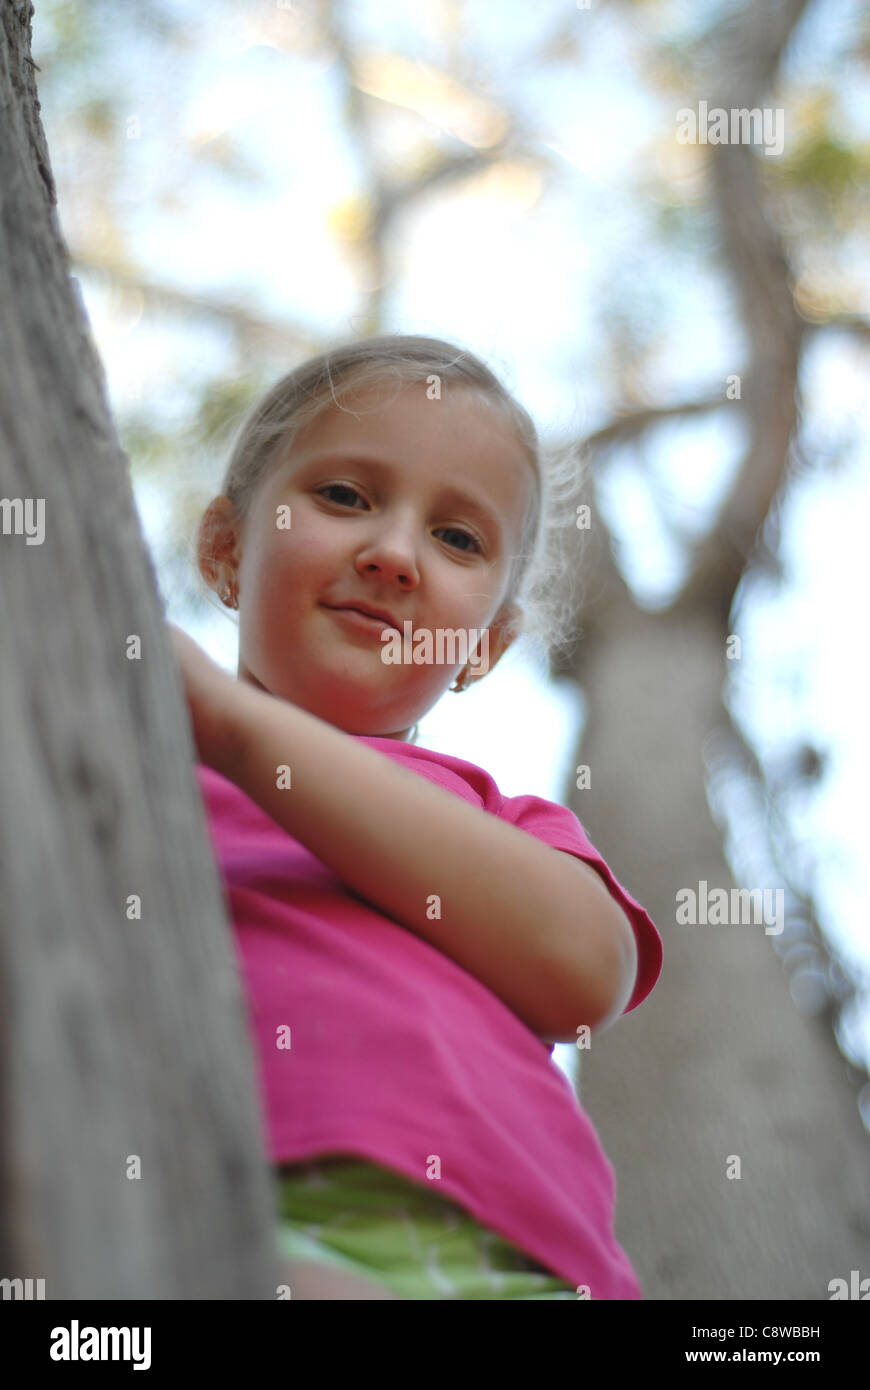 Young Girl Poses Next Palm Trees Stock Photo 234127321 | Shutterstock